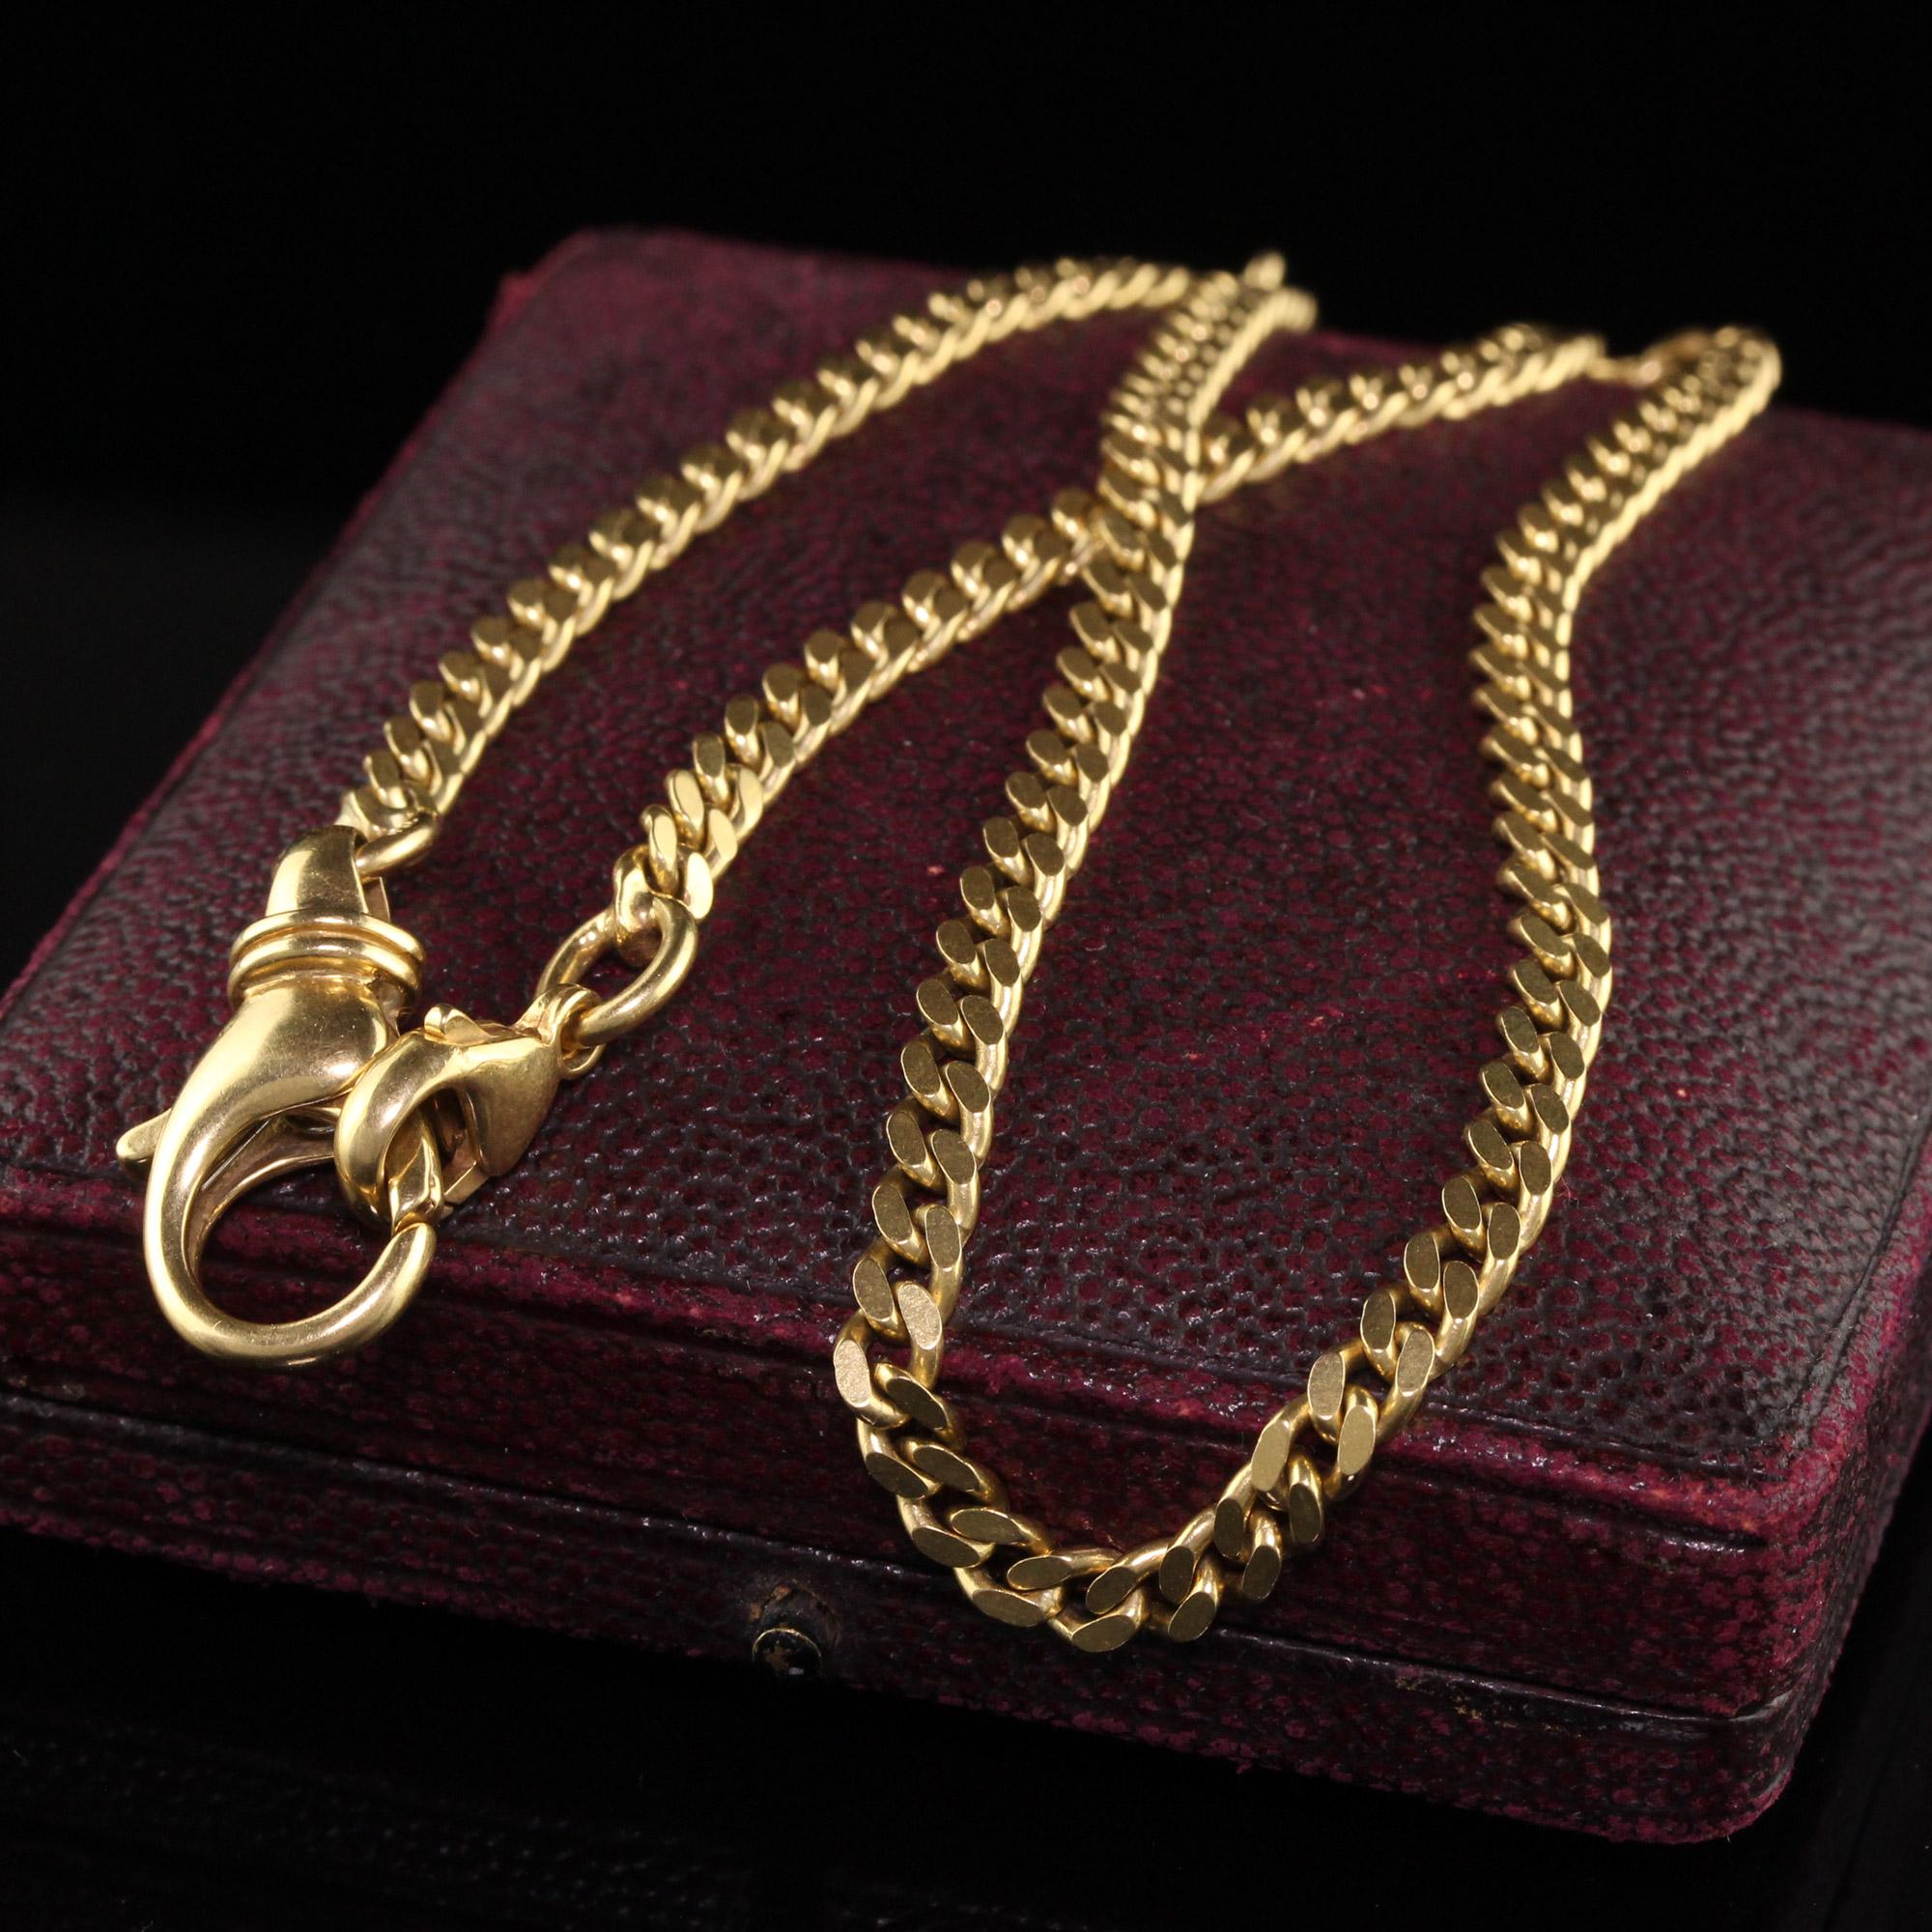 Beautiful Estate Retro Carl Bucherer 18K Yellow Gold Curb Link Chain Fob - 16 inches. This beautiful classic chain is crafted in 18k yellow gold. The chain is made in solid yellow gold and is hallmarked by Carl Bucherer (CB). It has substantial